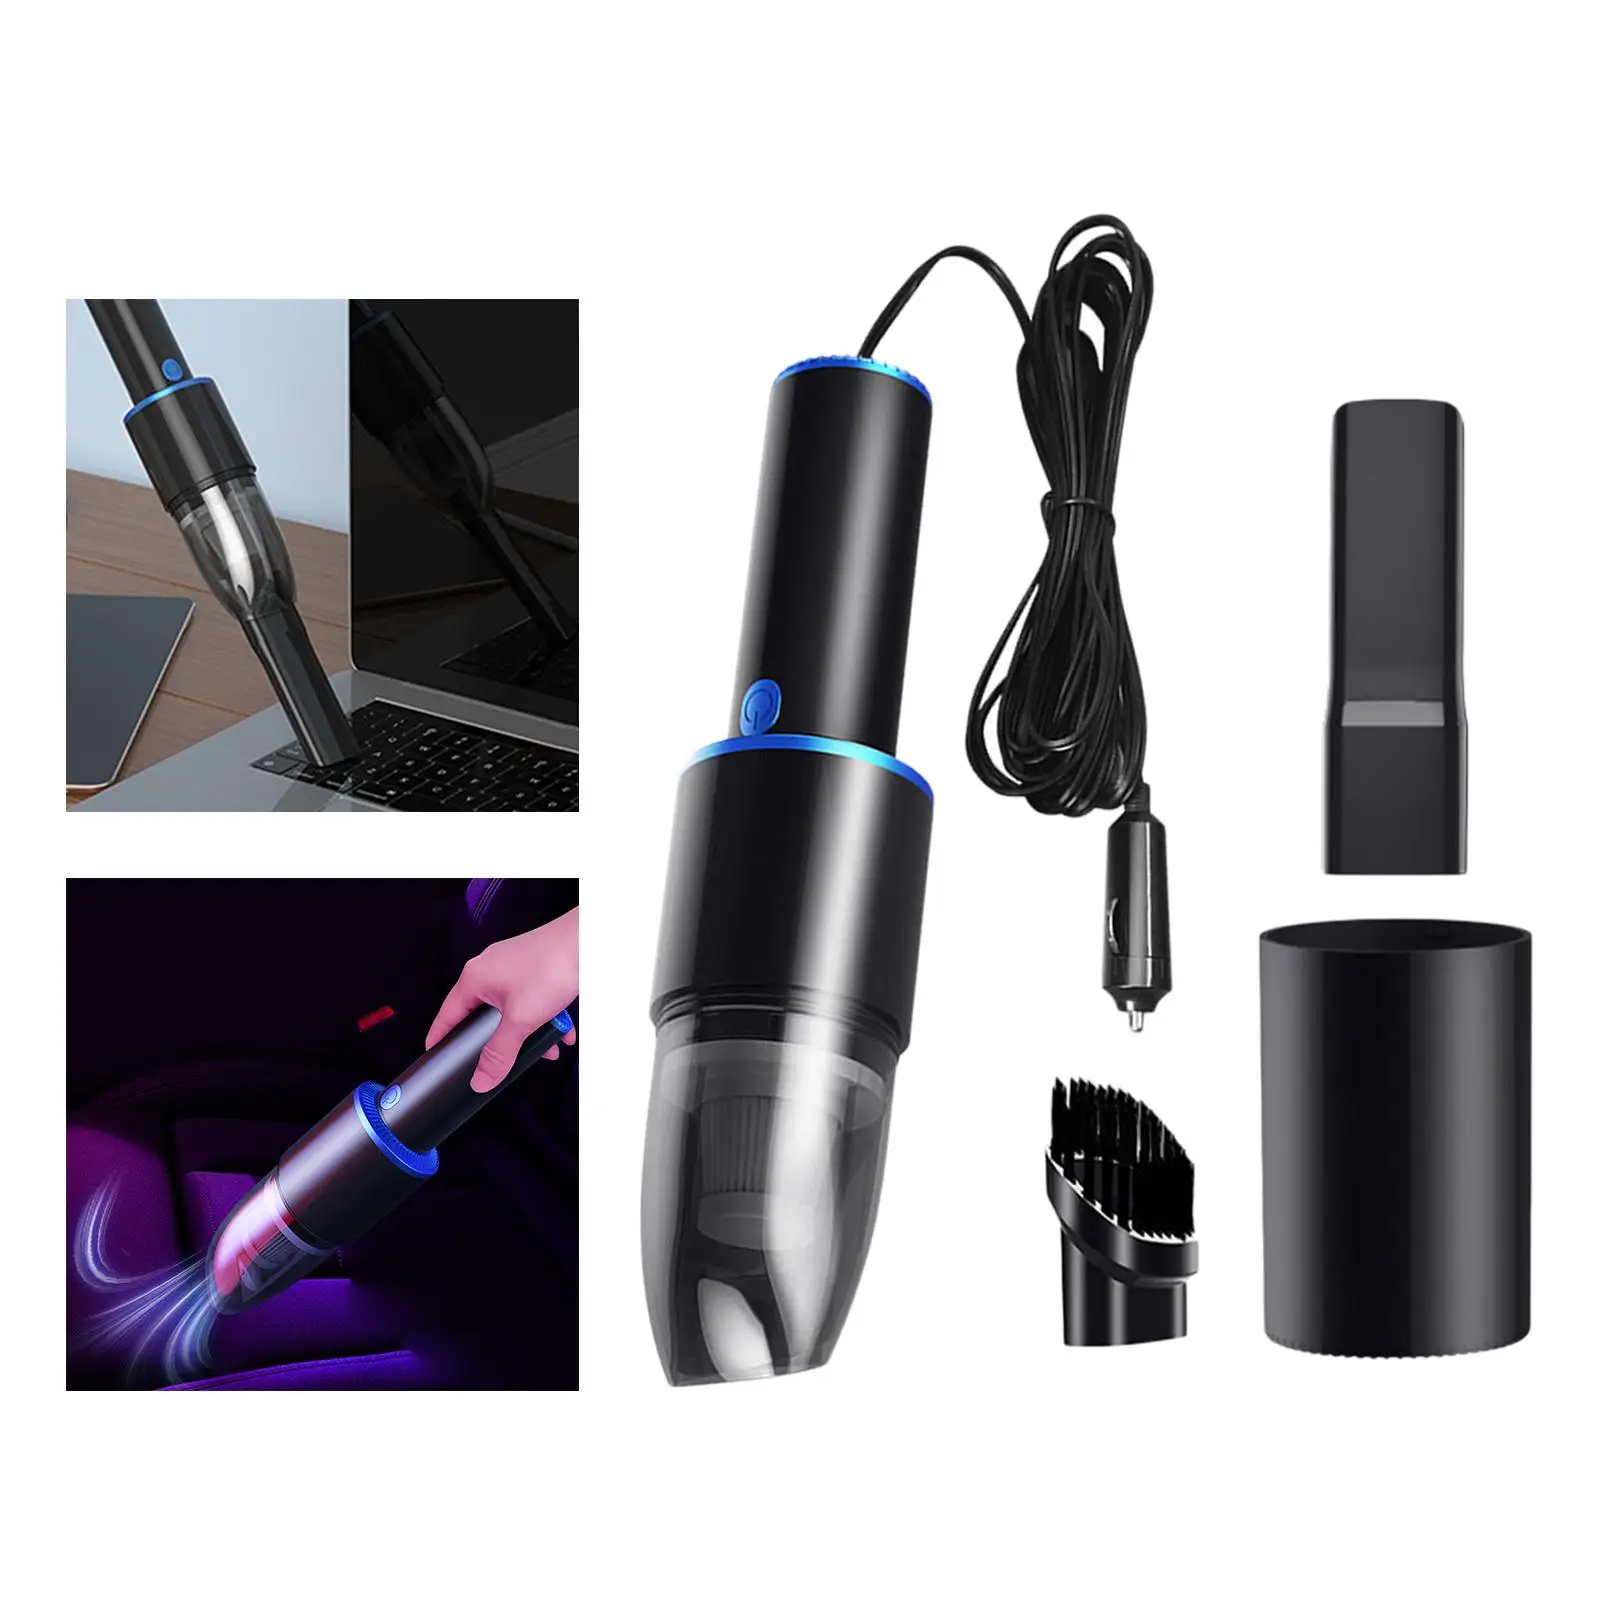 Handheld Car Vacuum Cleaner 10000PA Cyclone Suction for Home Use Vehicle Parts